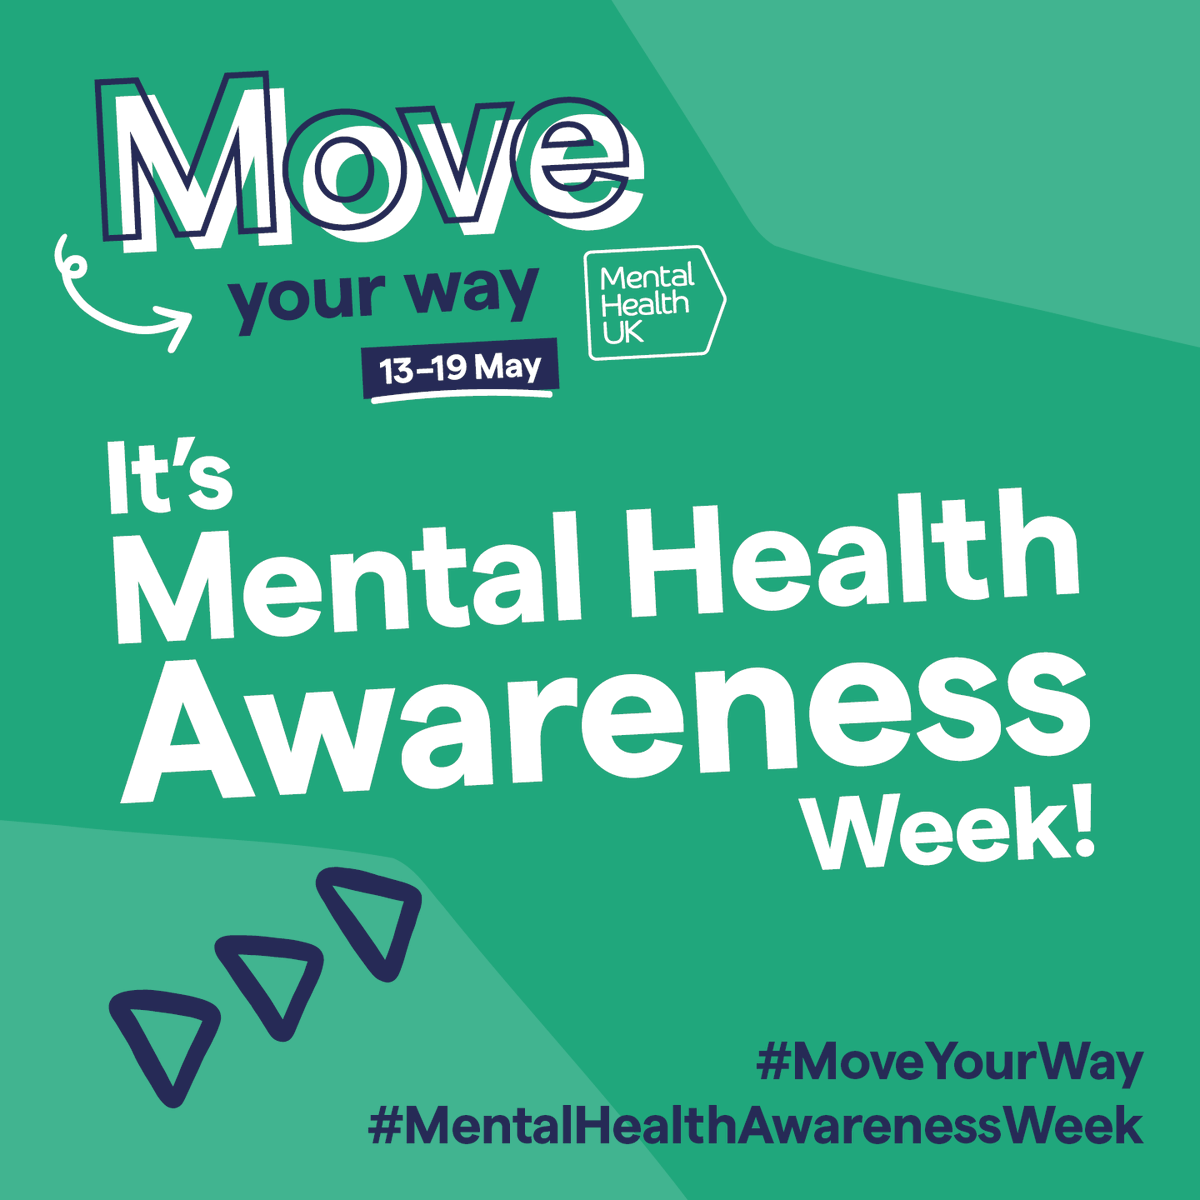 🏃 It's #MentalHealthAwarenessWeek and we're talking about movement and mental health. We'll be exploring the benefits of movement, the barriers that stop us from being active, and encouraging movement that works for you. Learn more👇 bit.ly/2REYCaG